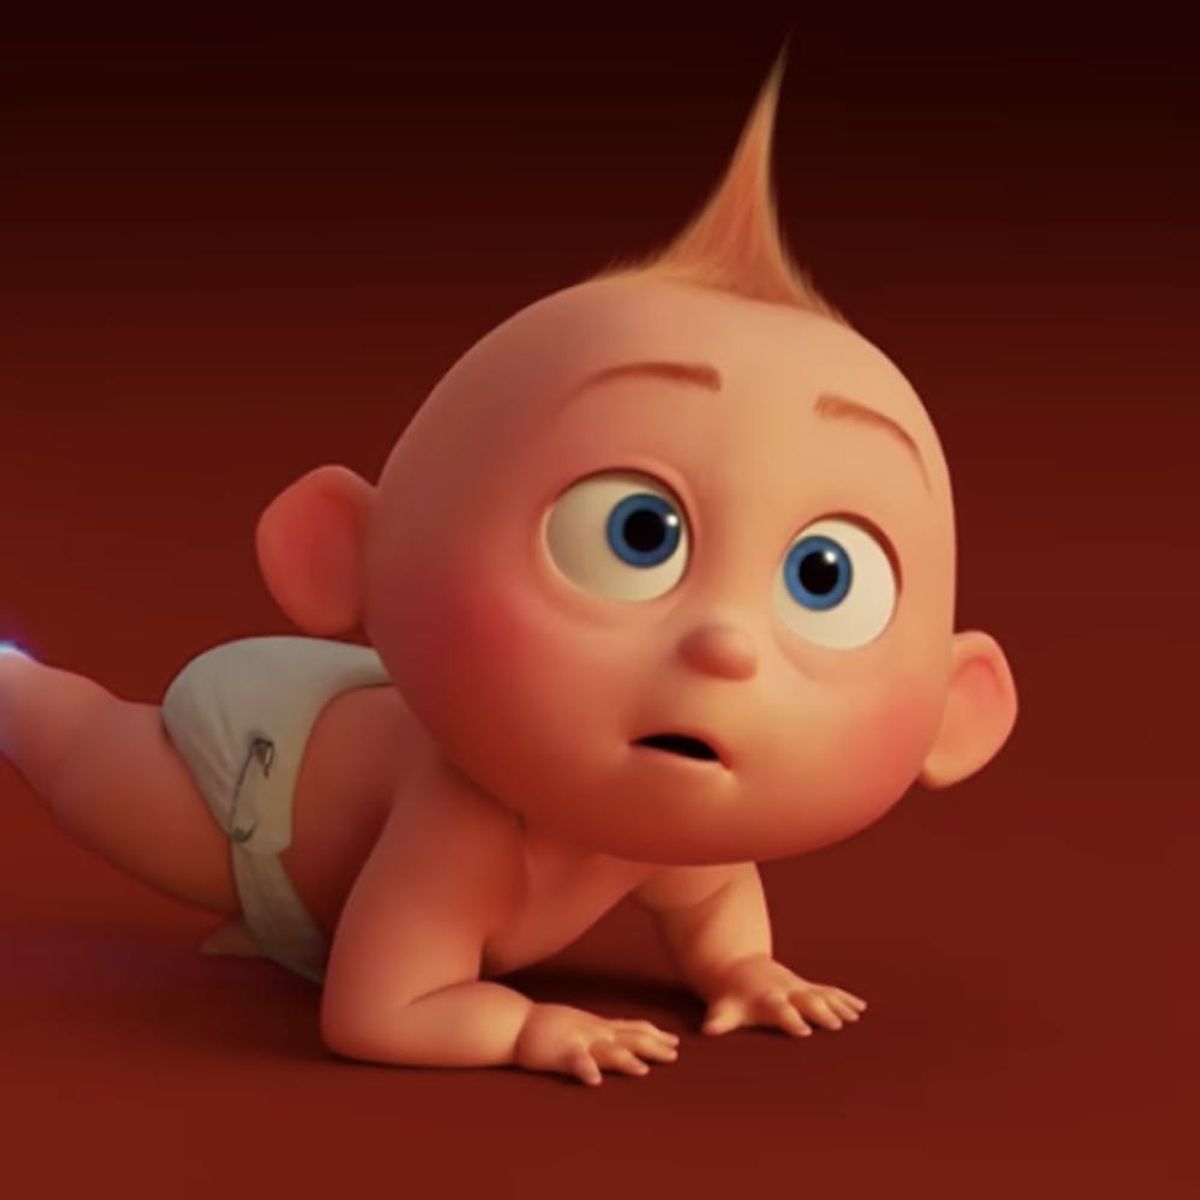 “The Incredibles 2” Teaser Trailer Is Here and It’s Absolutely Adorable